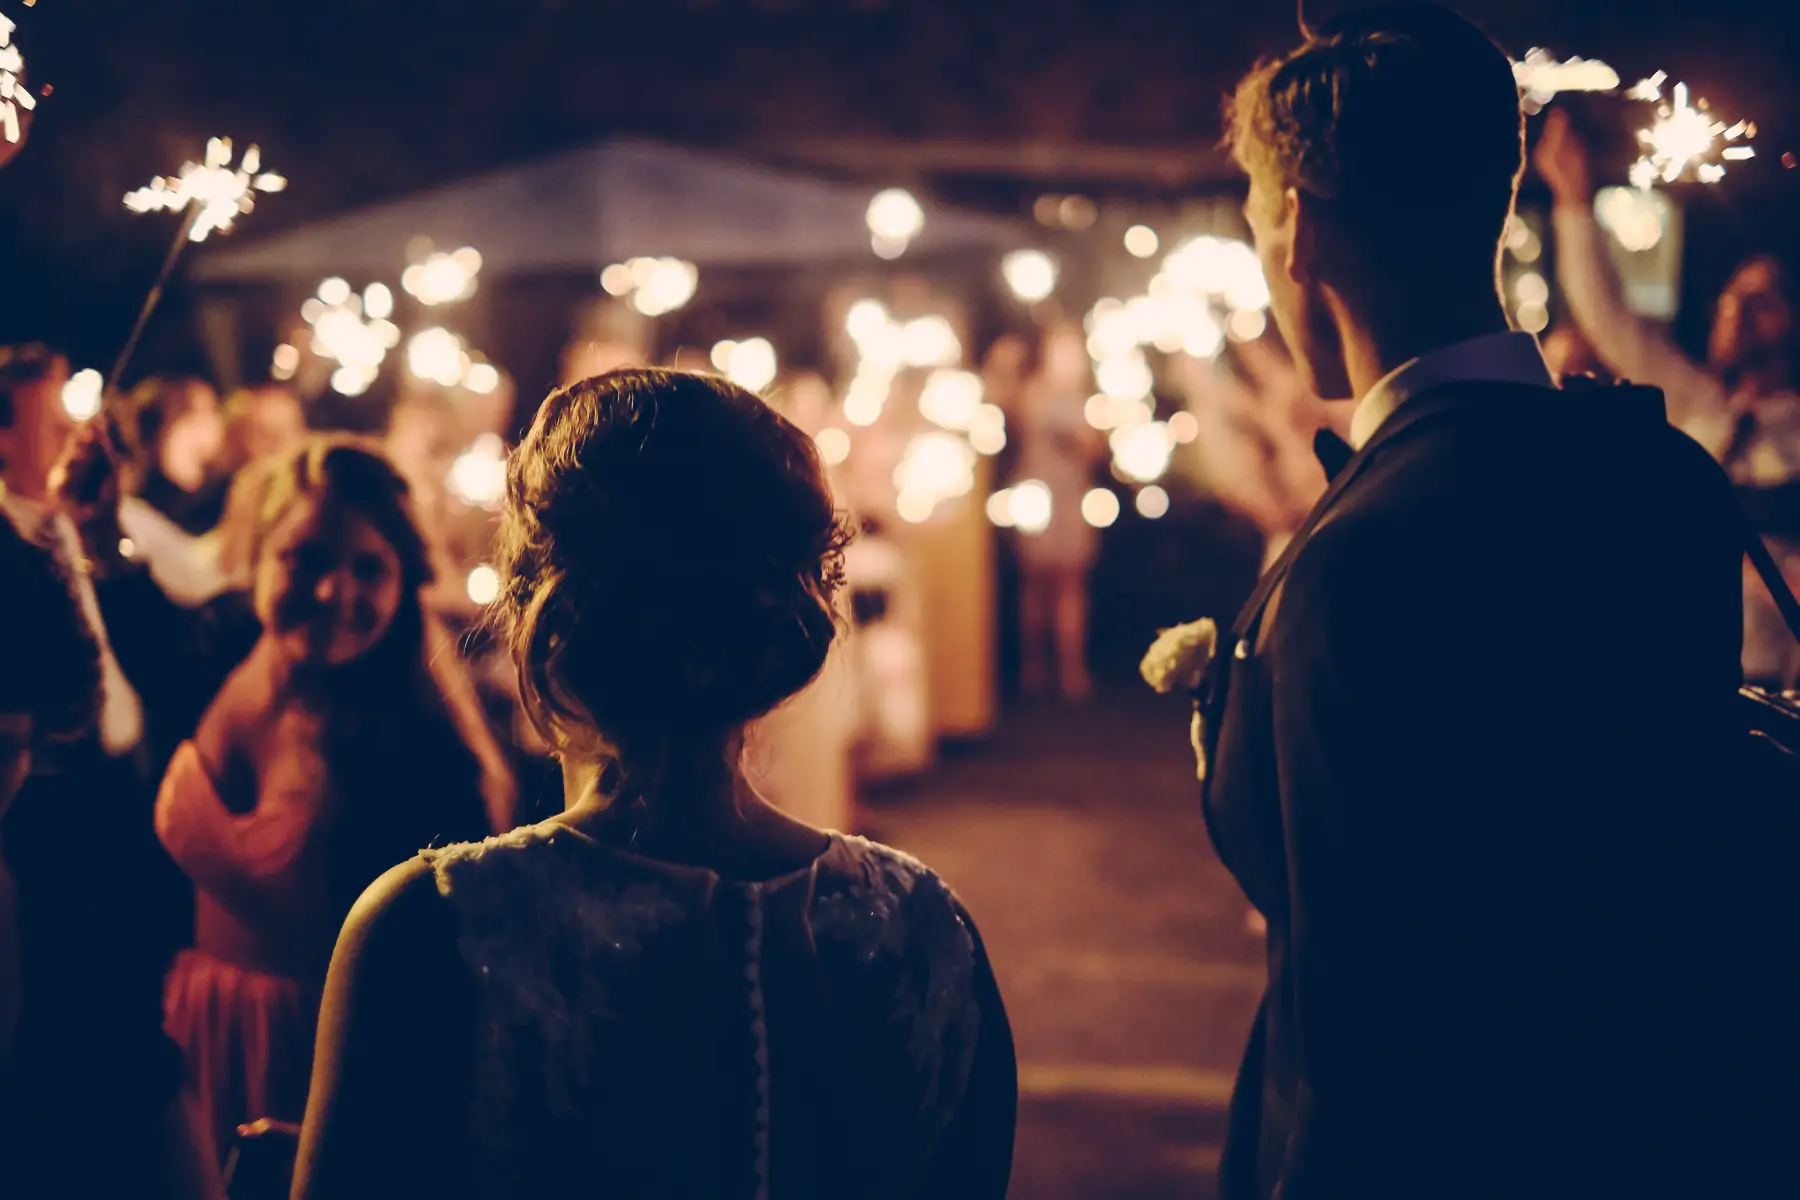 Nighttime wedding - silhouette of bride and groom being welcomed by guests at reception with sparklers